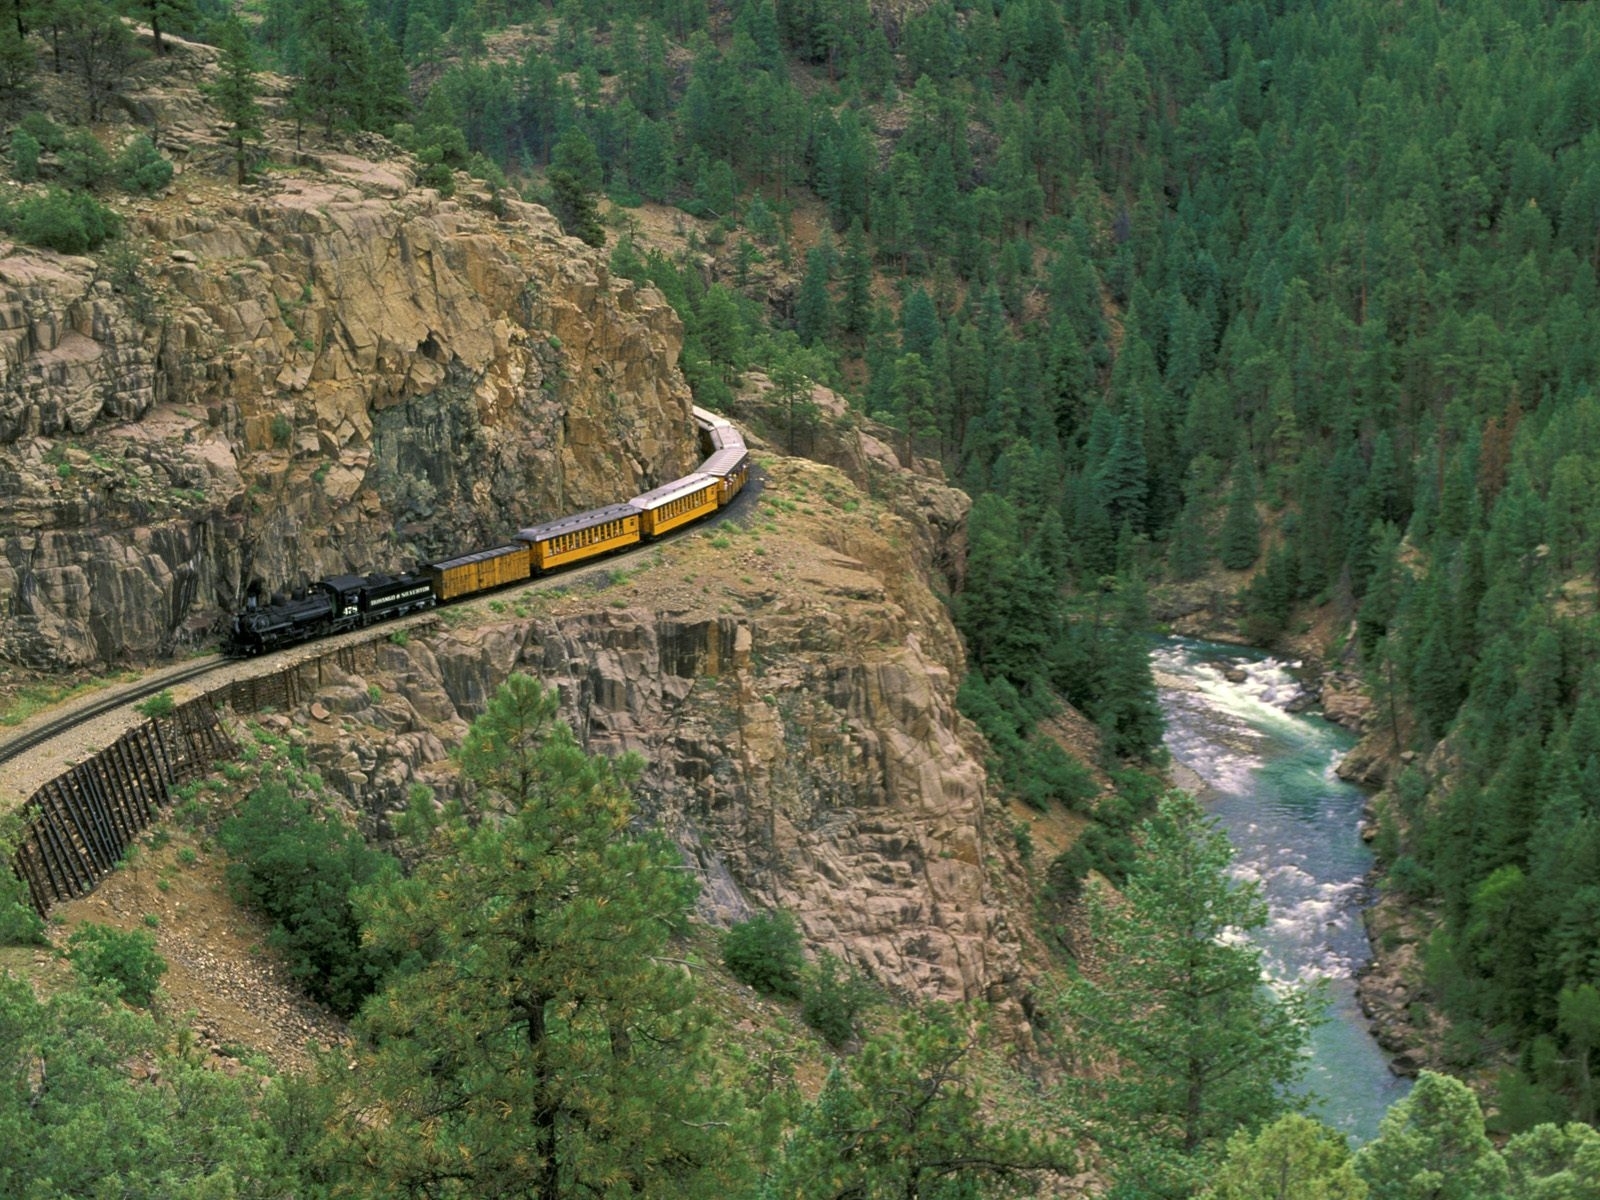 trains, mountains, transport, landscape, rivers, trees, green